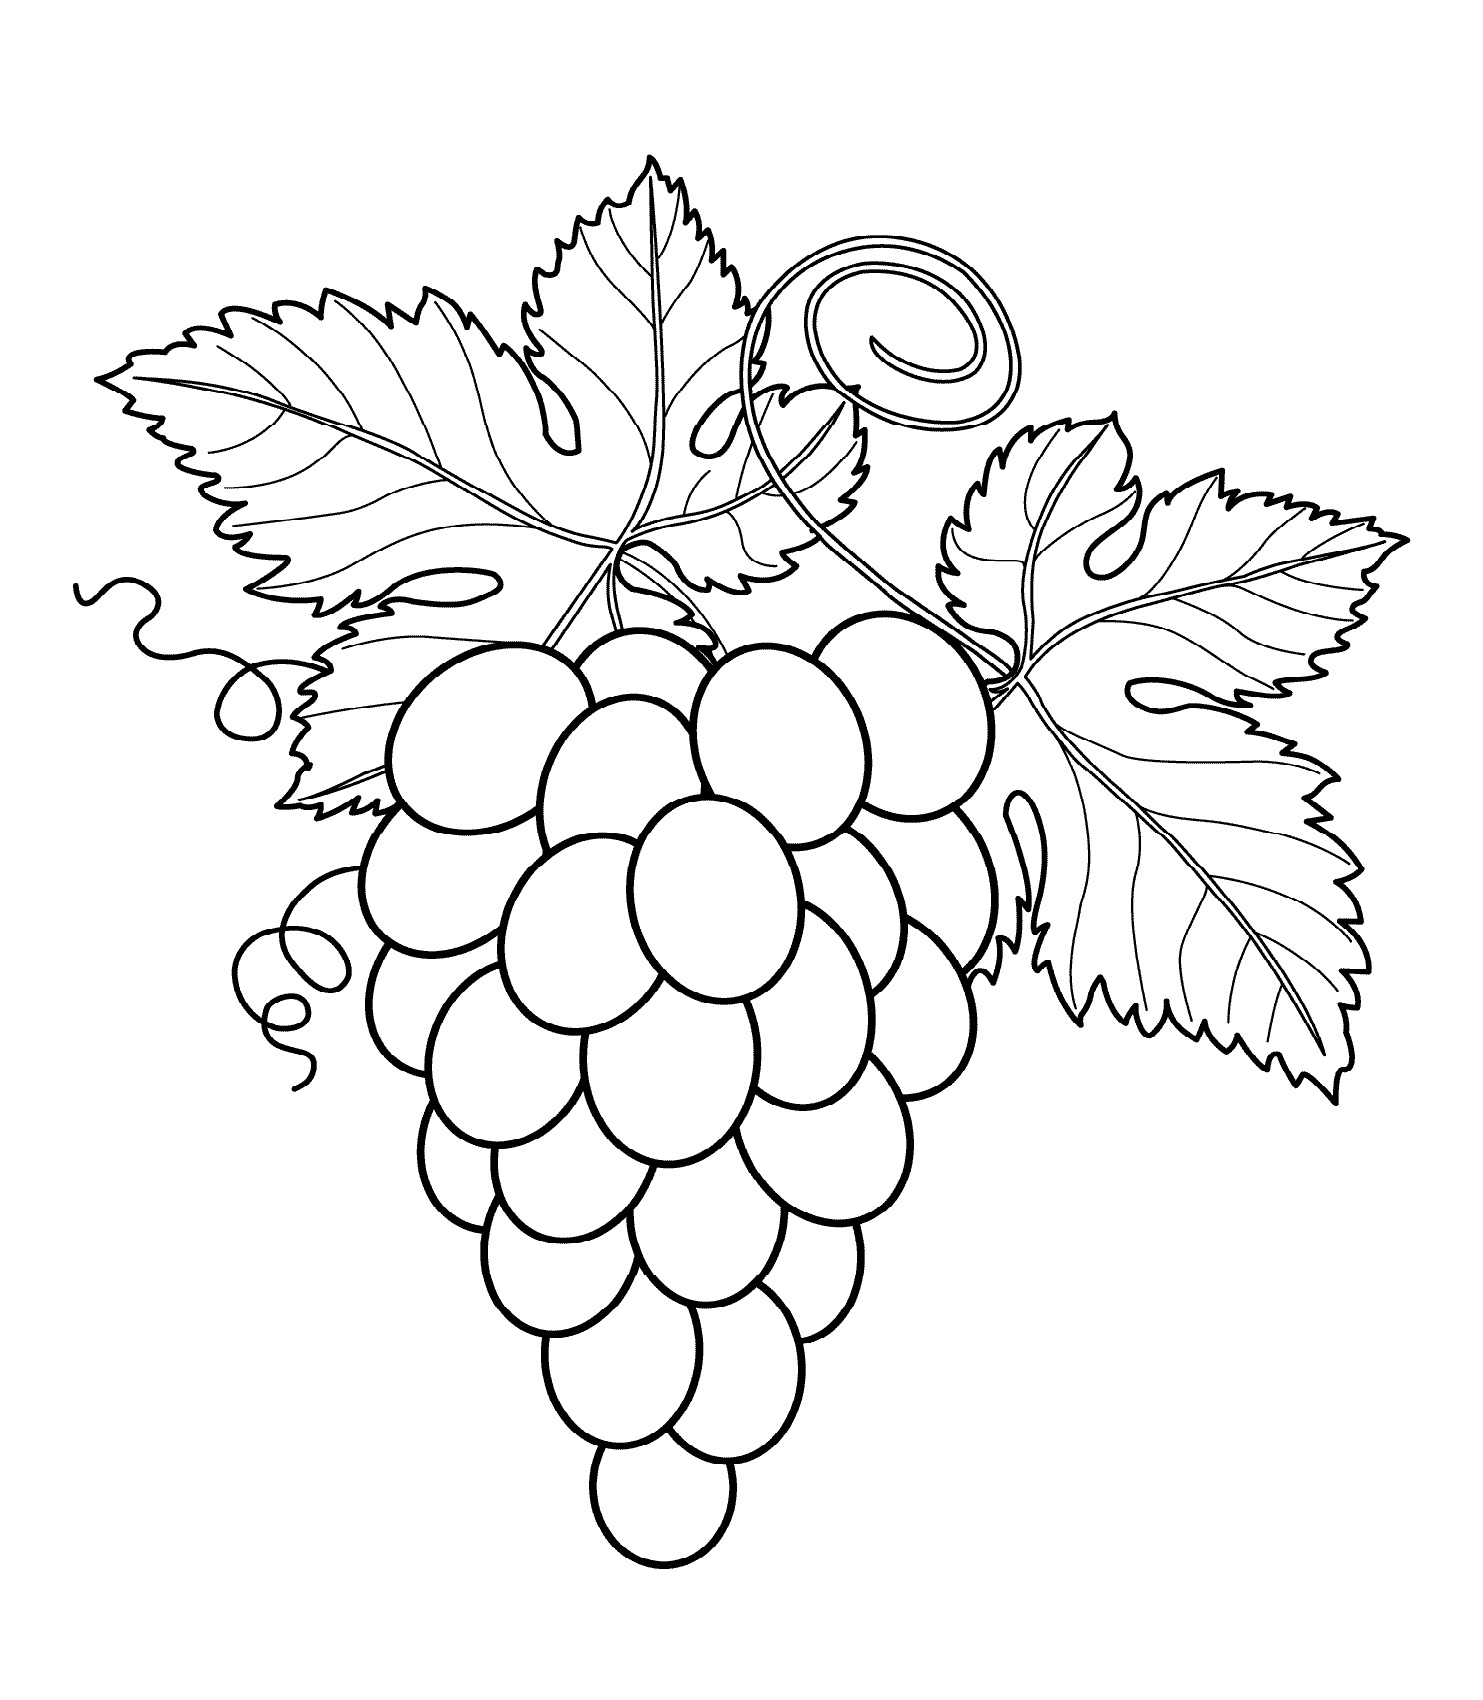 Grapes With Leaf Coloring Page